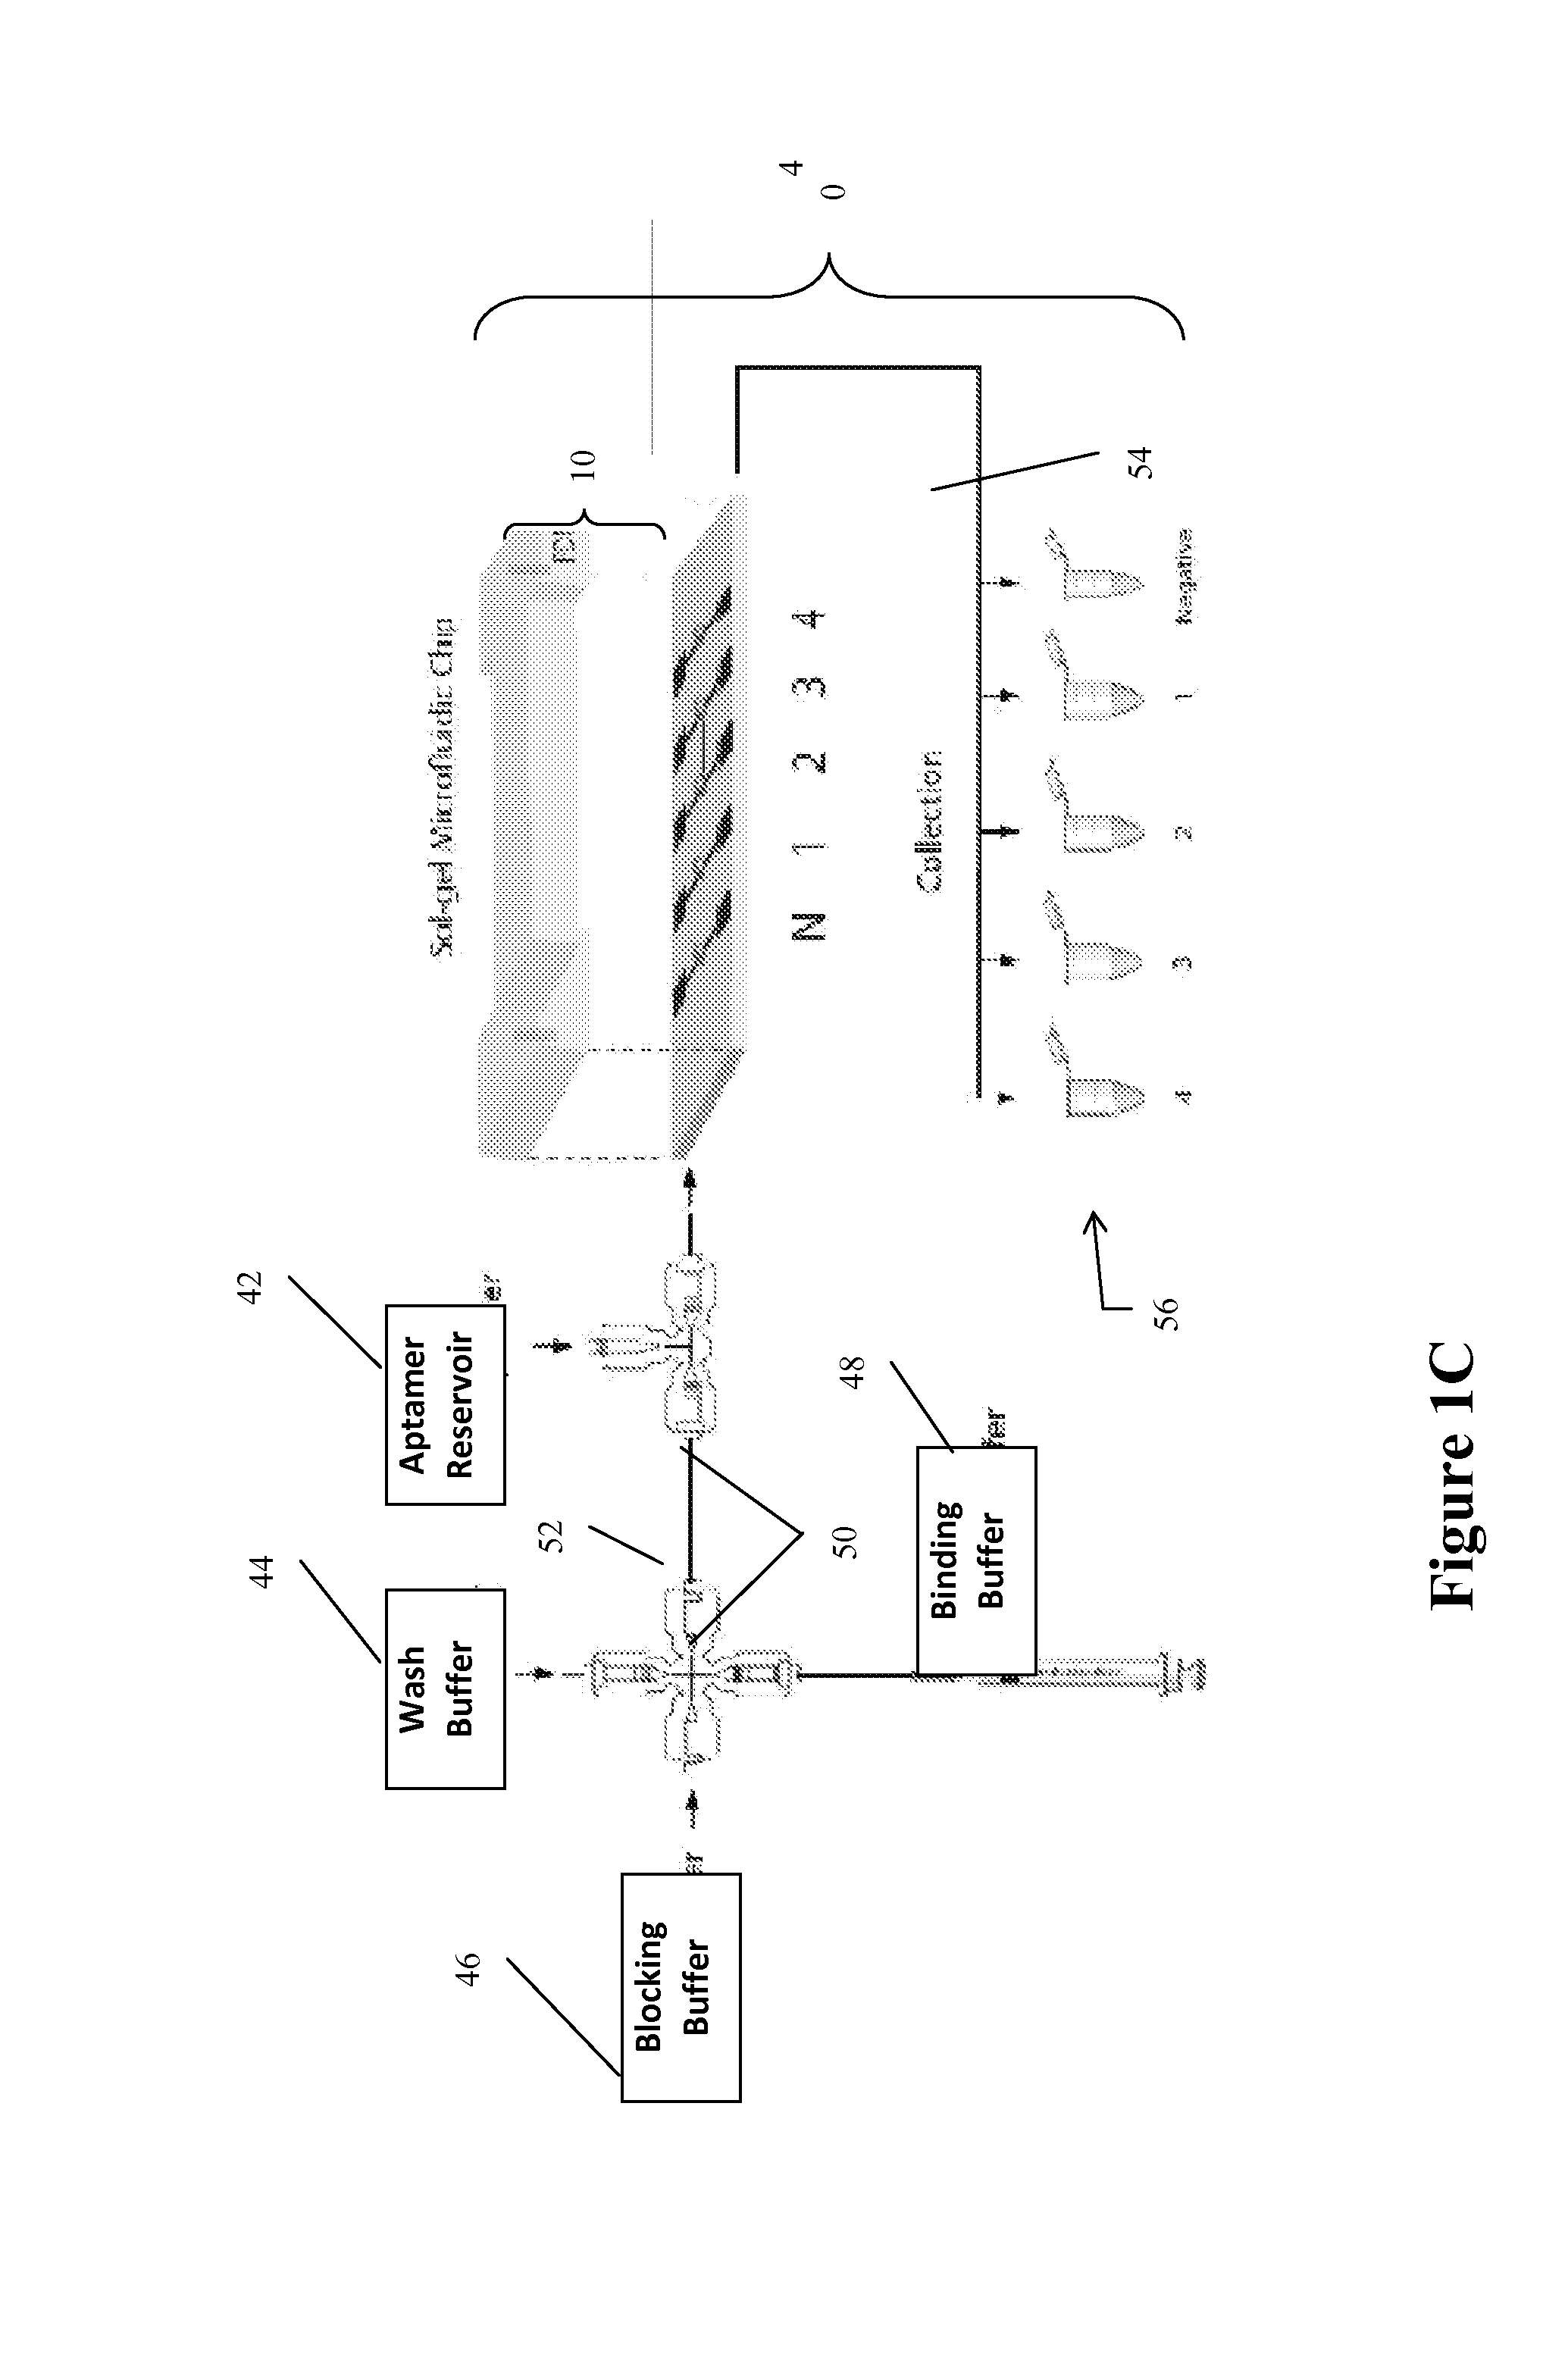 Device for rapid identification of nucleic acids for binding to specific chemical targets